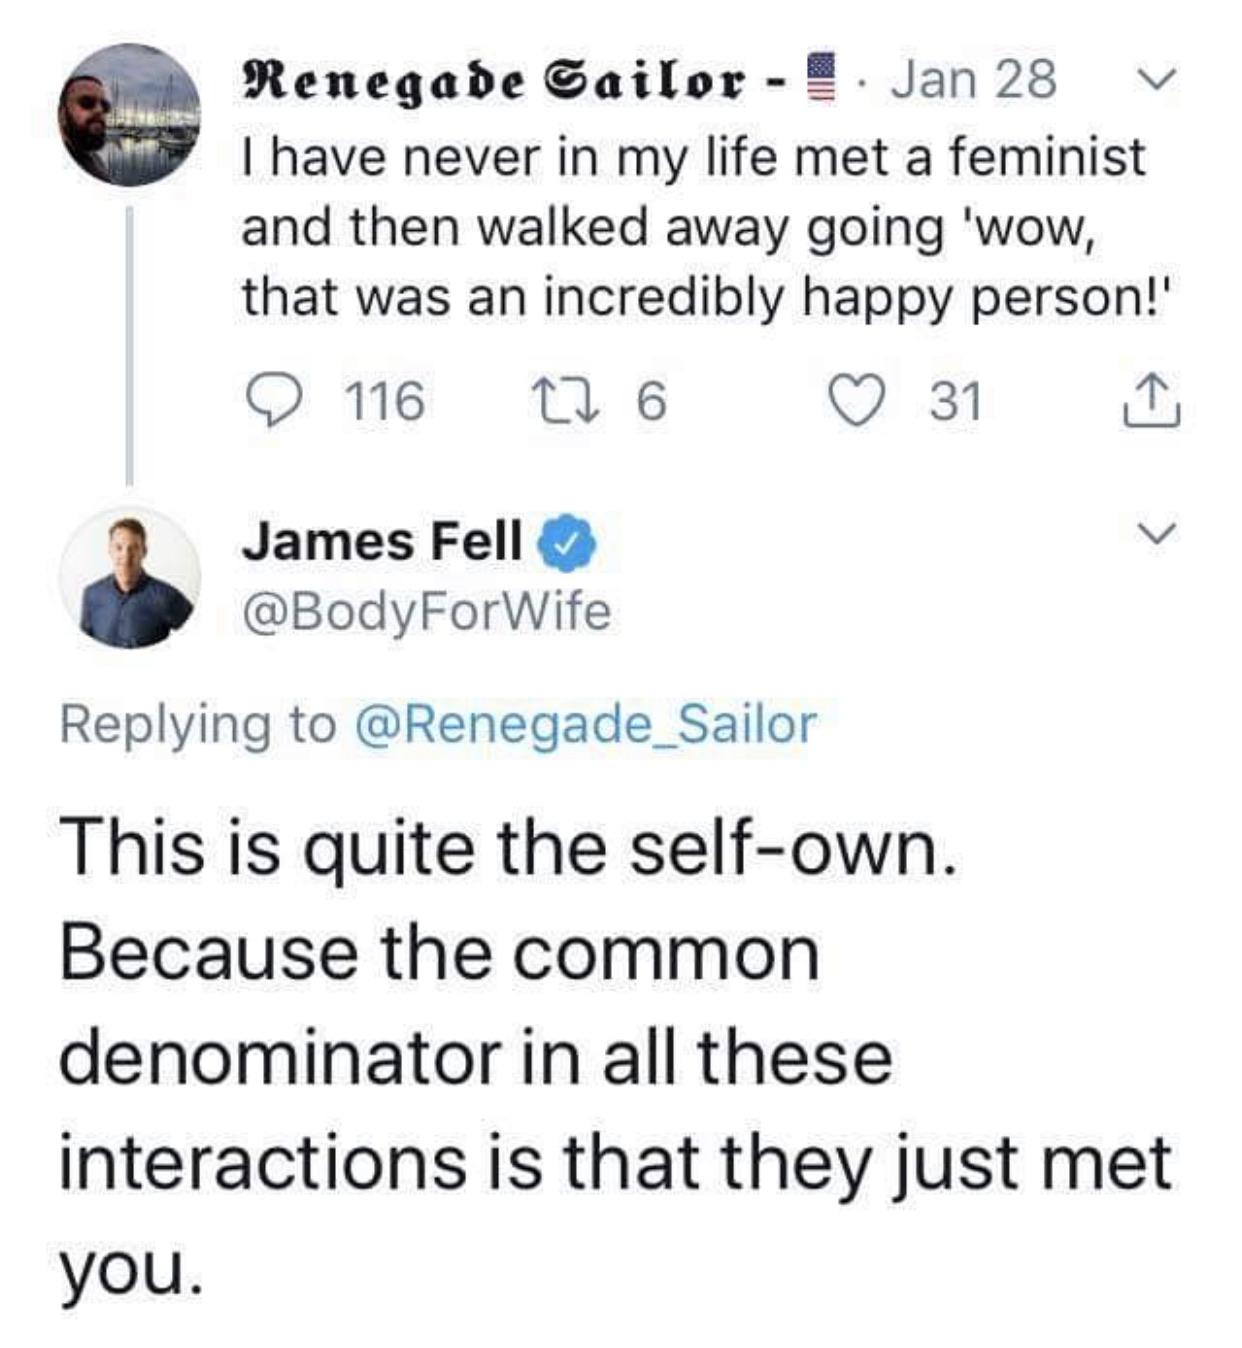 love - Renegade Sailor Jan 28 v I have never in my life met a feminist and then walked away going 'wow, that was an incredibly happy person! 116 22 6 31 1 James Fell This is quite the selfown. Because the common denominator in all these interactions is th